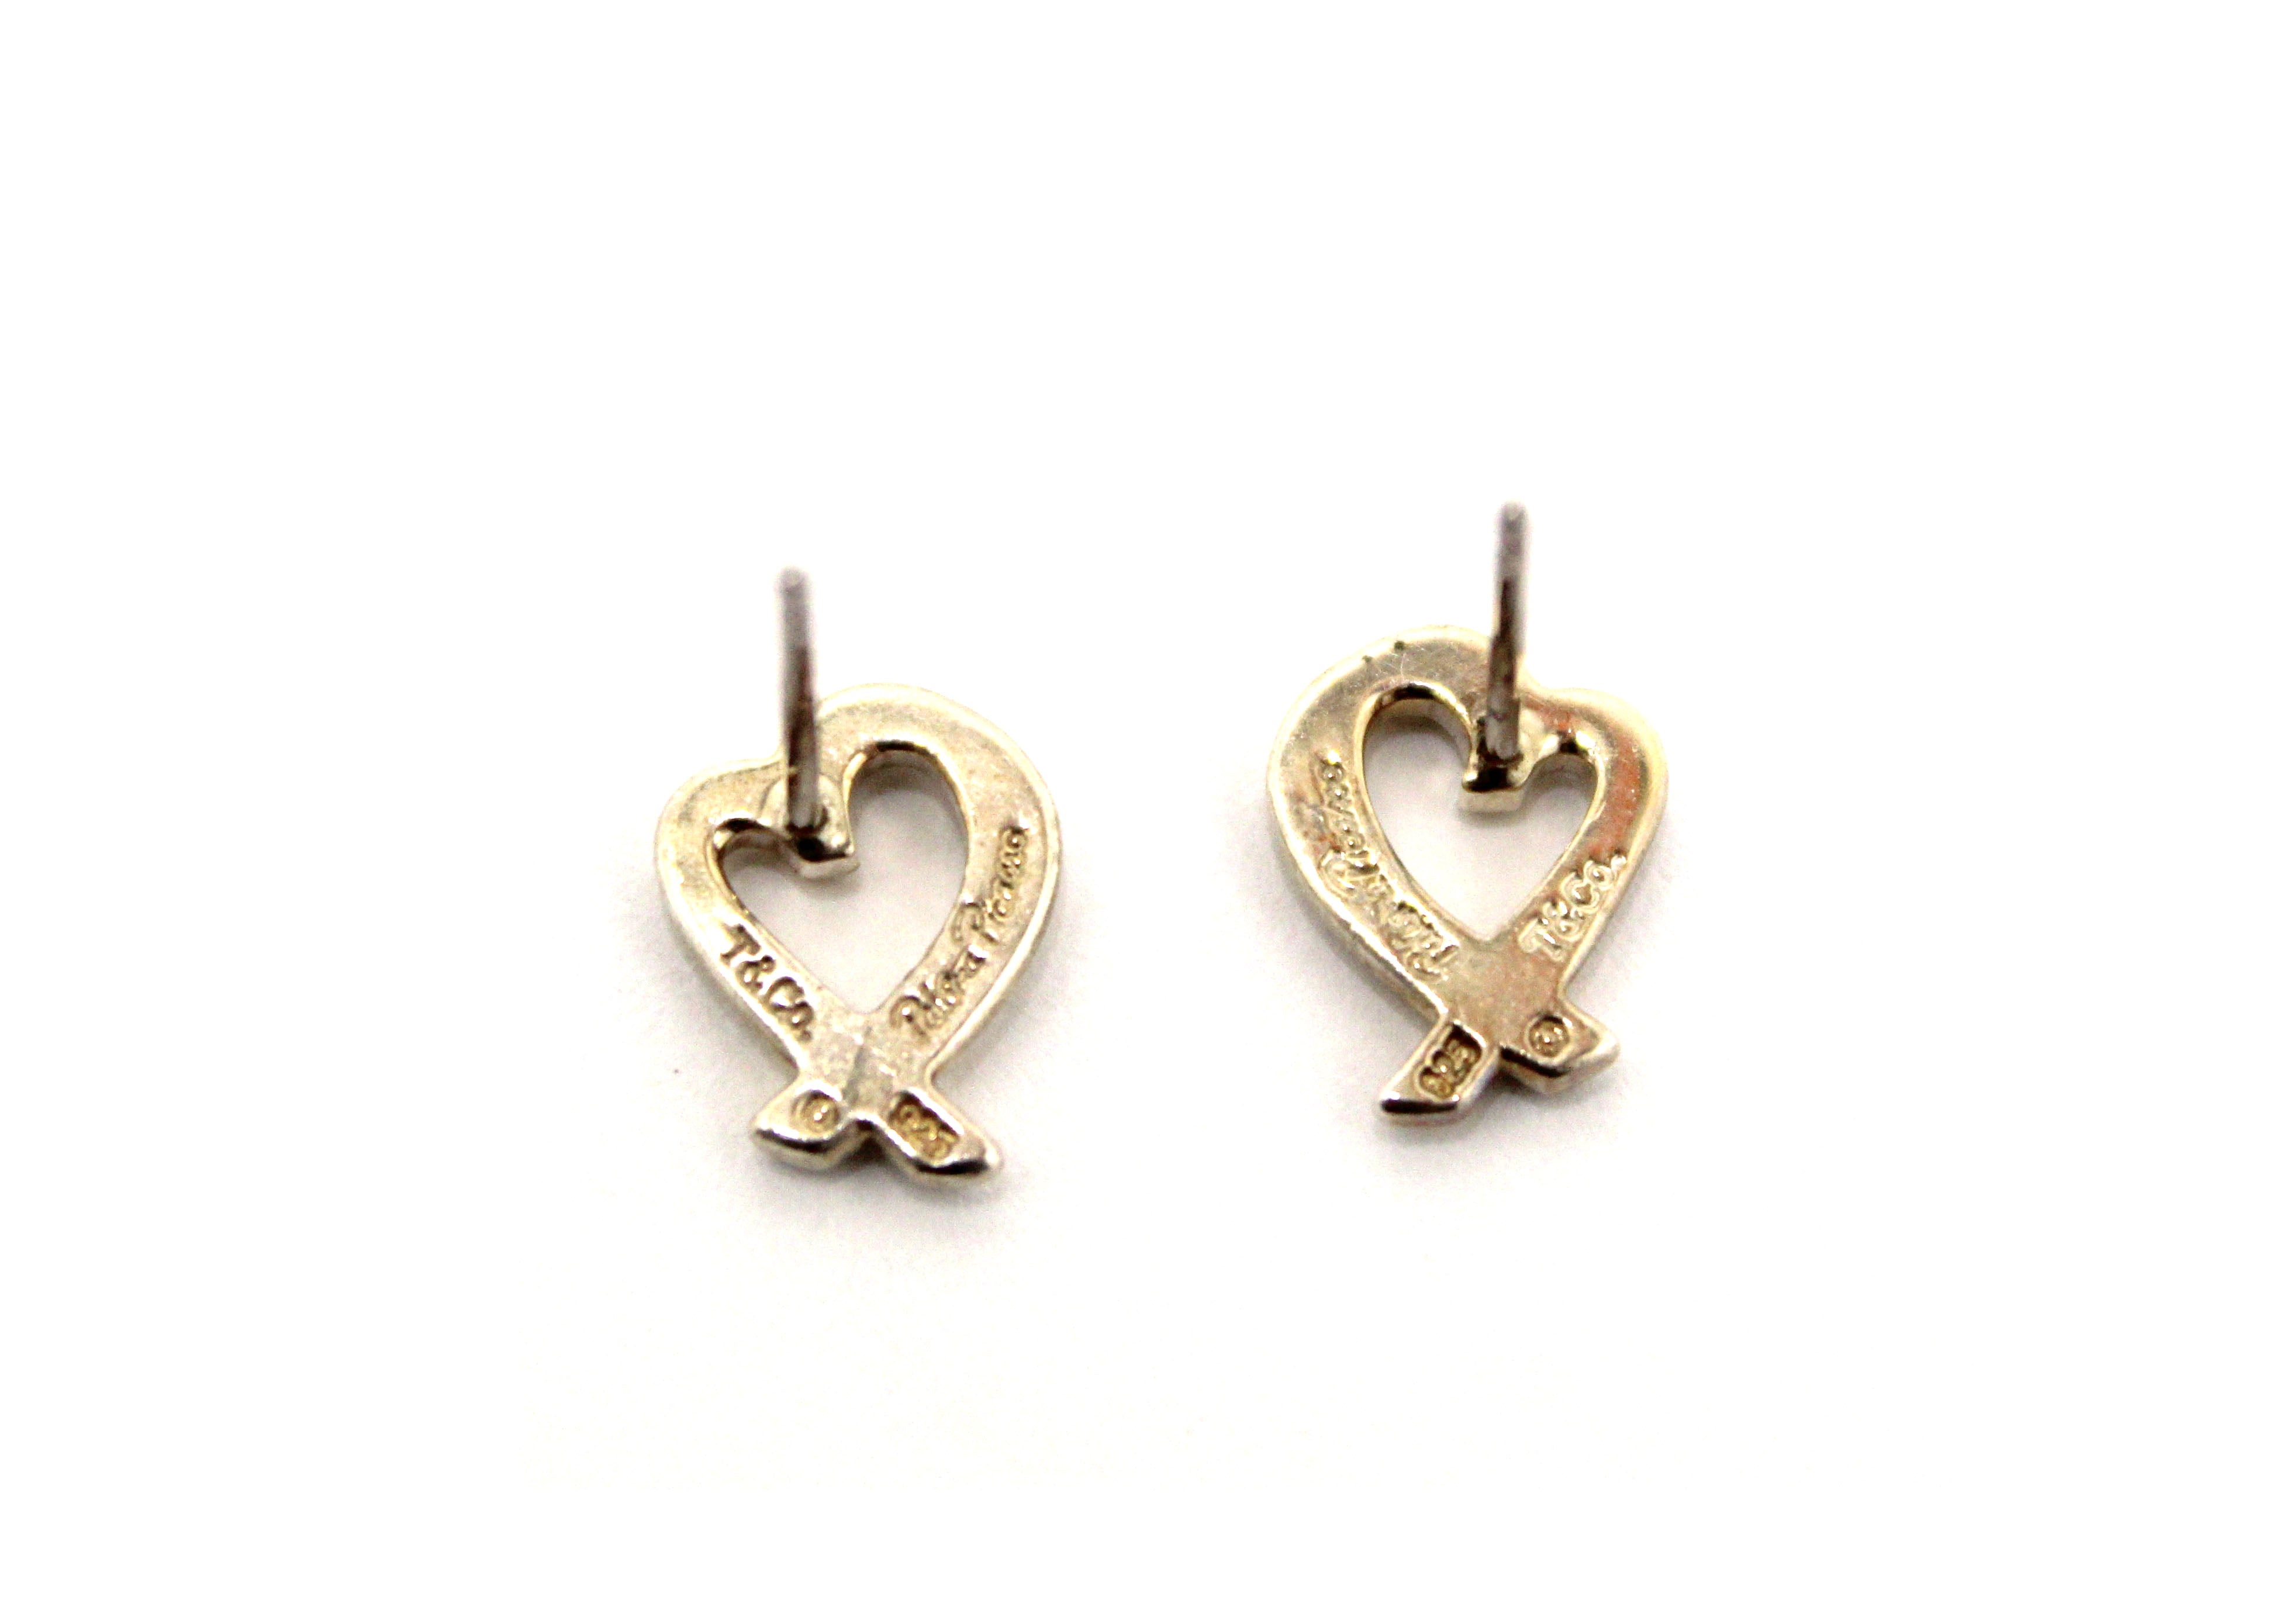 Authentic Tiffany & Co. Sterling Silver 925 Picasso Heart Earrings